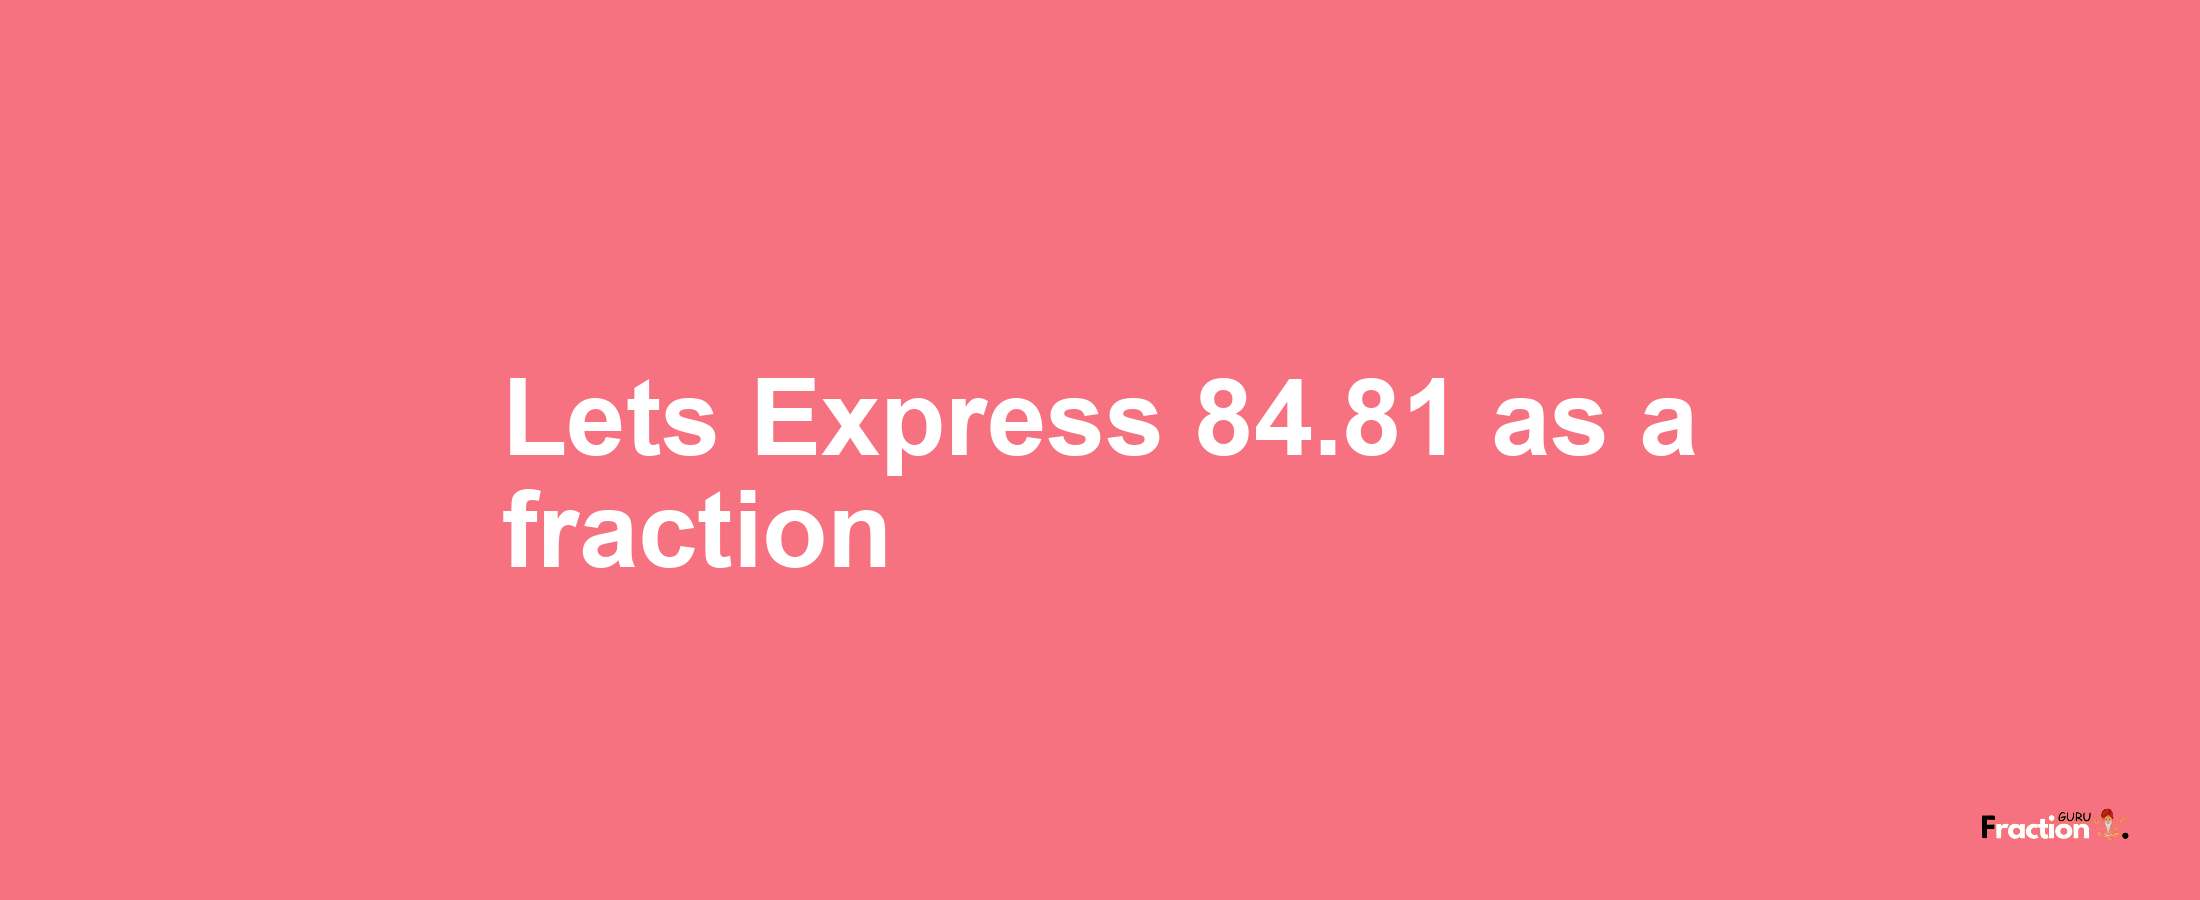 Lets Express 84.81 as afraction